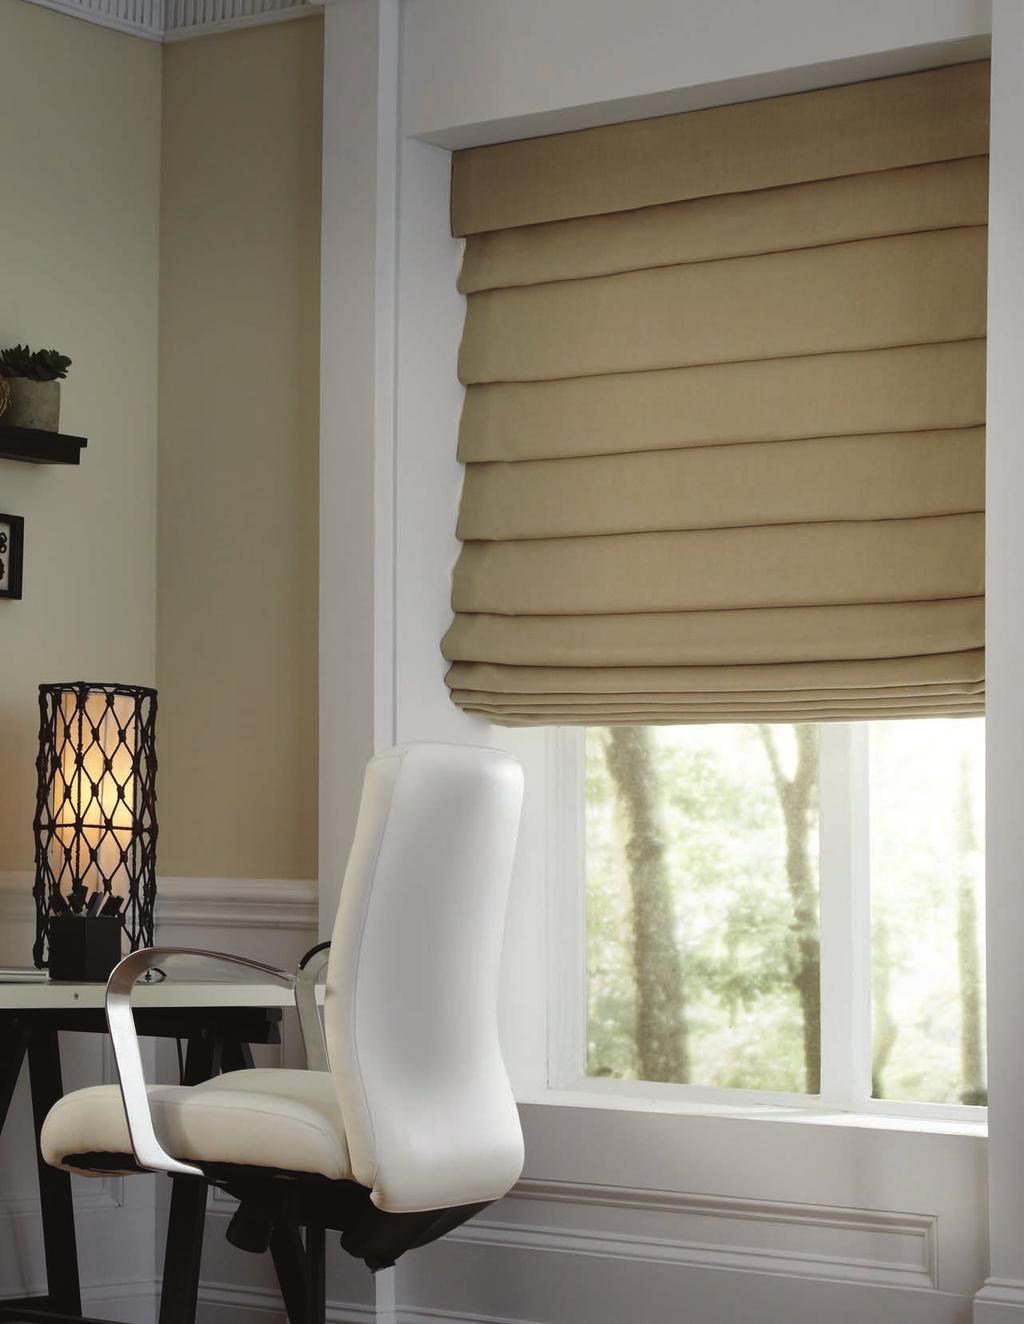 Fashion pleated shade in Sinopia fabric, Ebony, from The Gallery Collection Control: